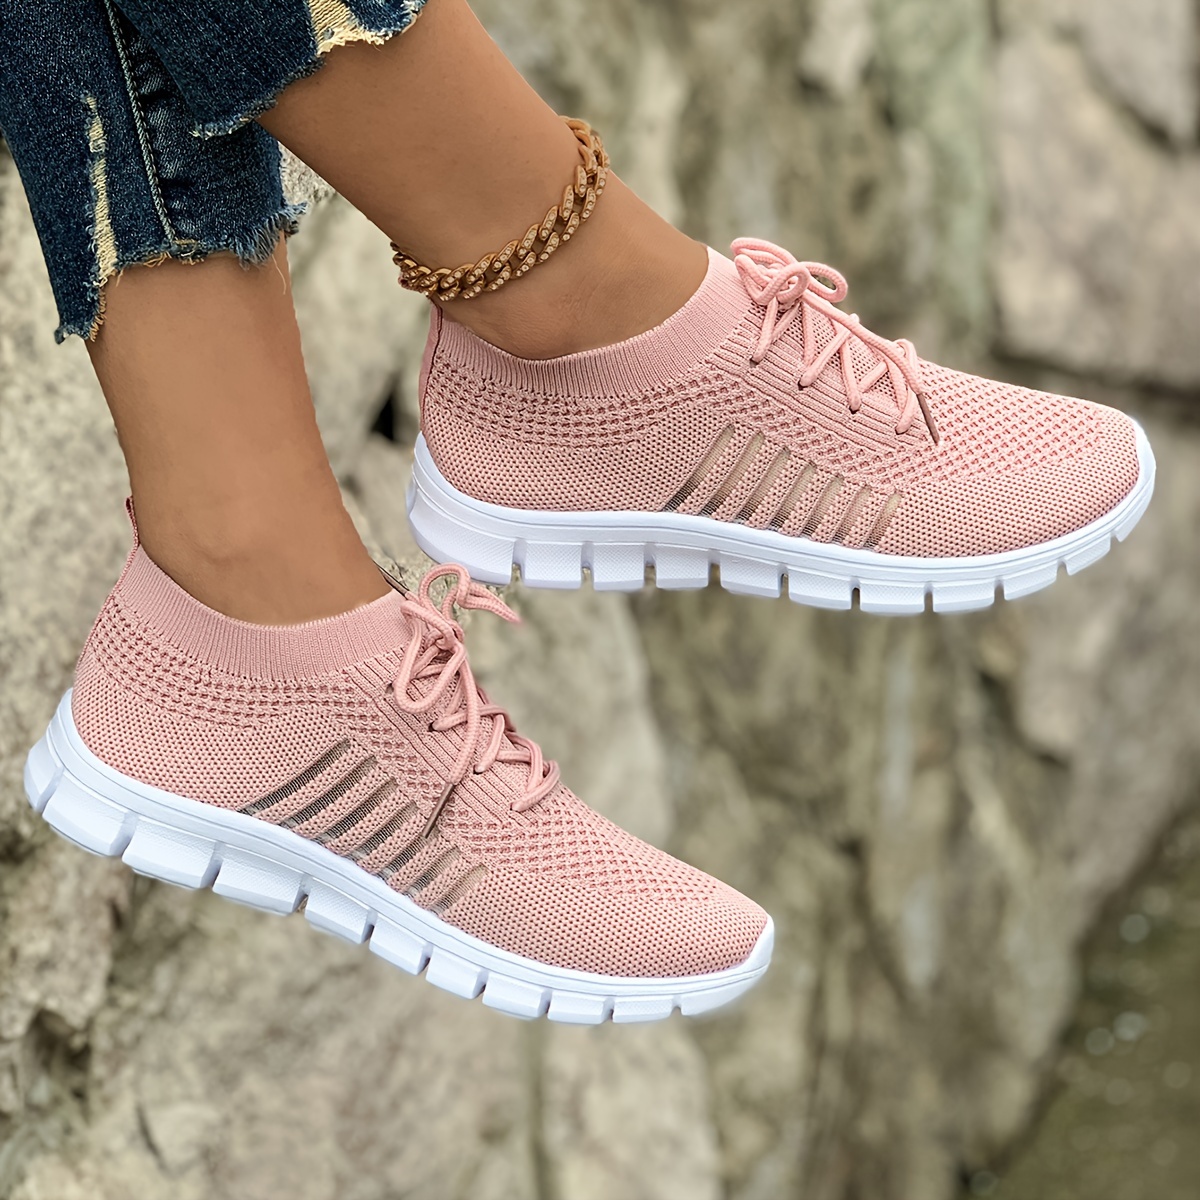 mesh sneakers women s knit lightweight breathable mesh lace details 6